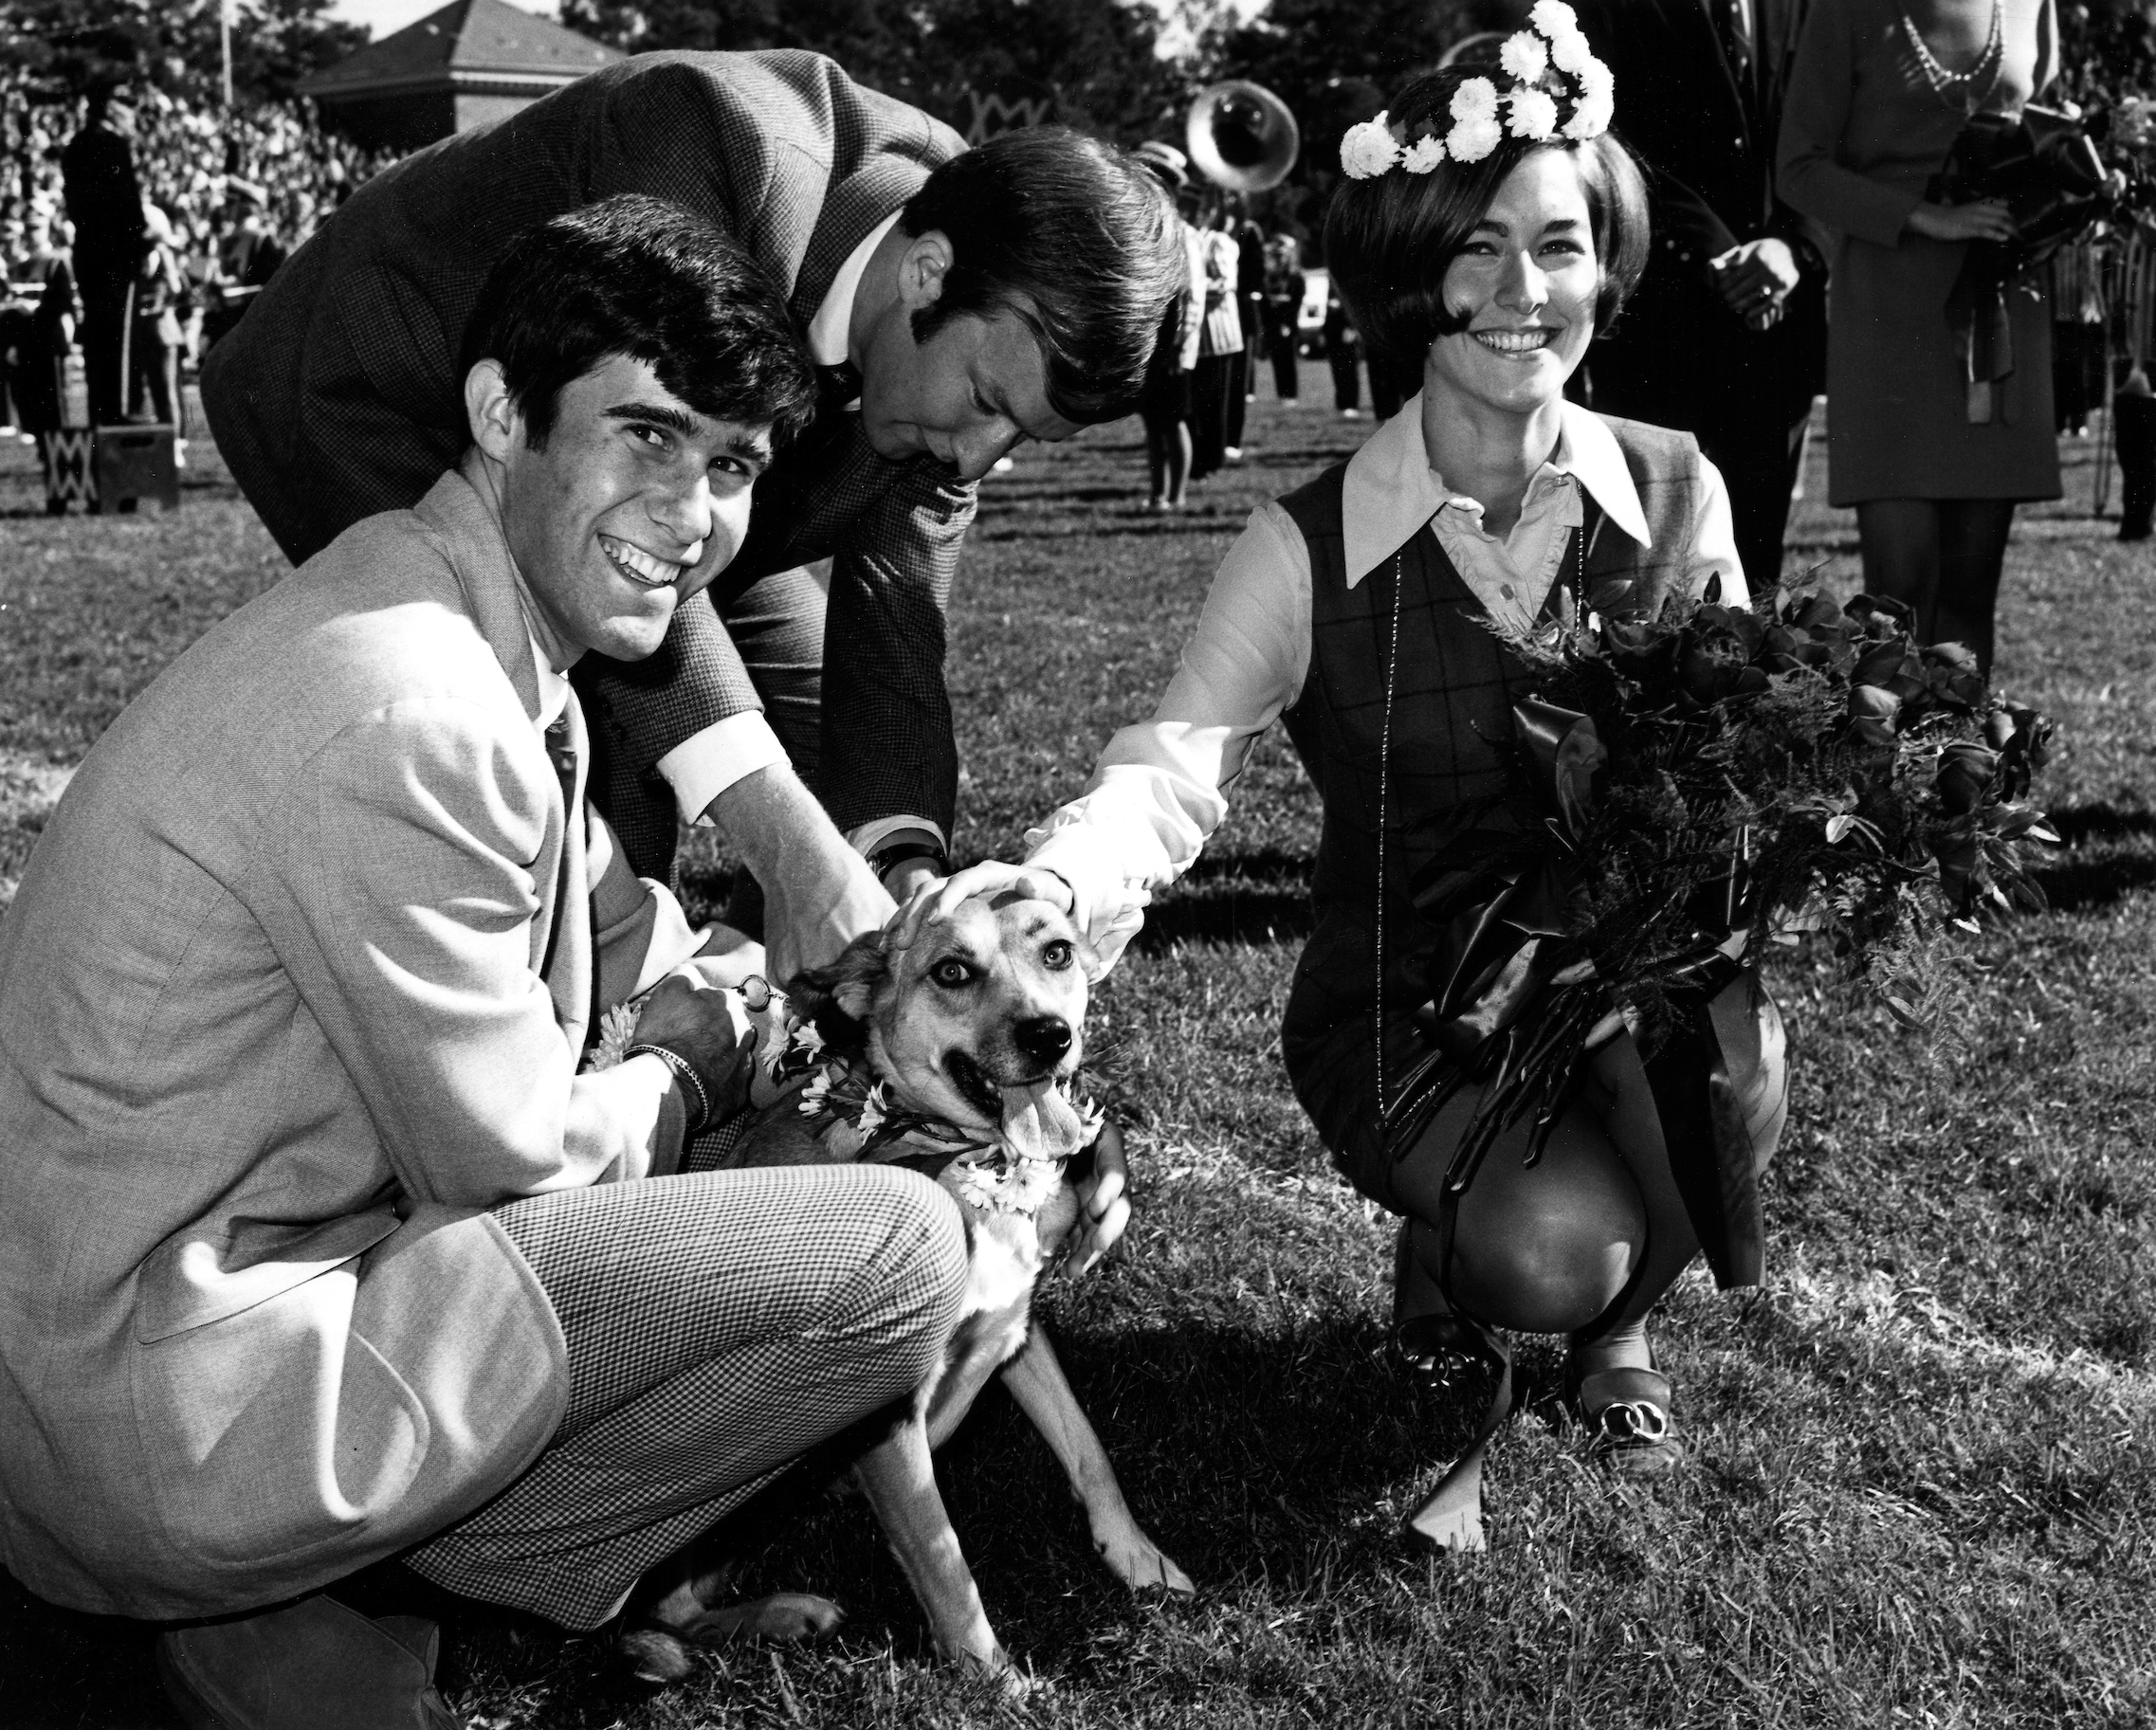 In 1969, Homecoming Queen Elaine Barnes ’70 was crowned at half-time ceremonies surrounded by her court of princesses — including “Sam,” a campus mutt — who was the Flat Hat’s candidate for queen. 